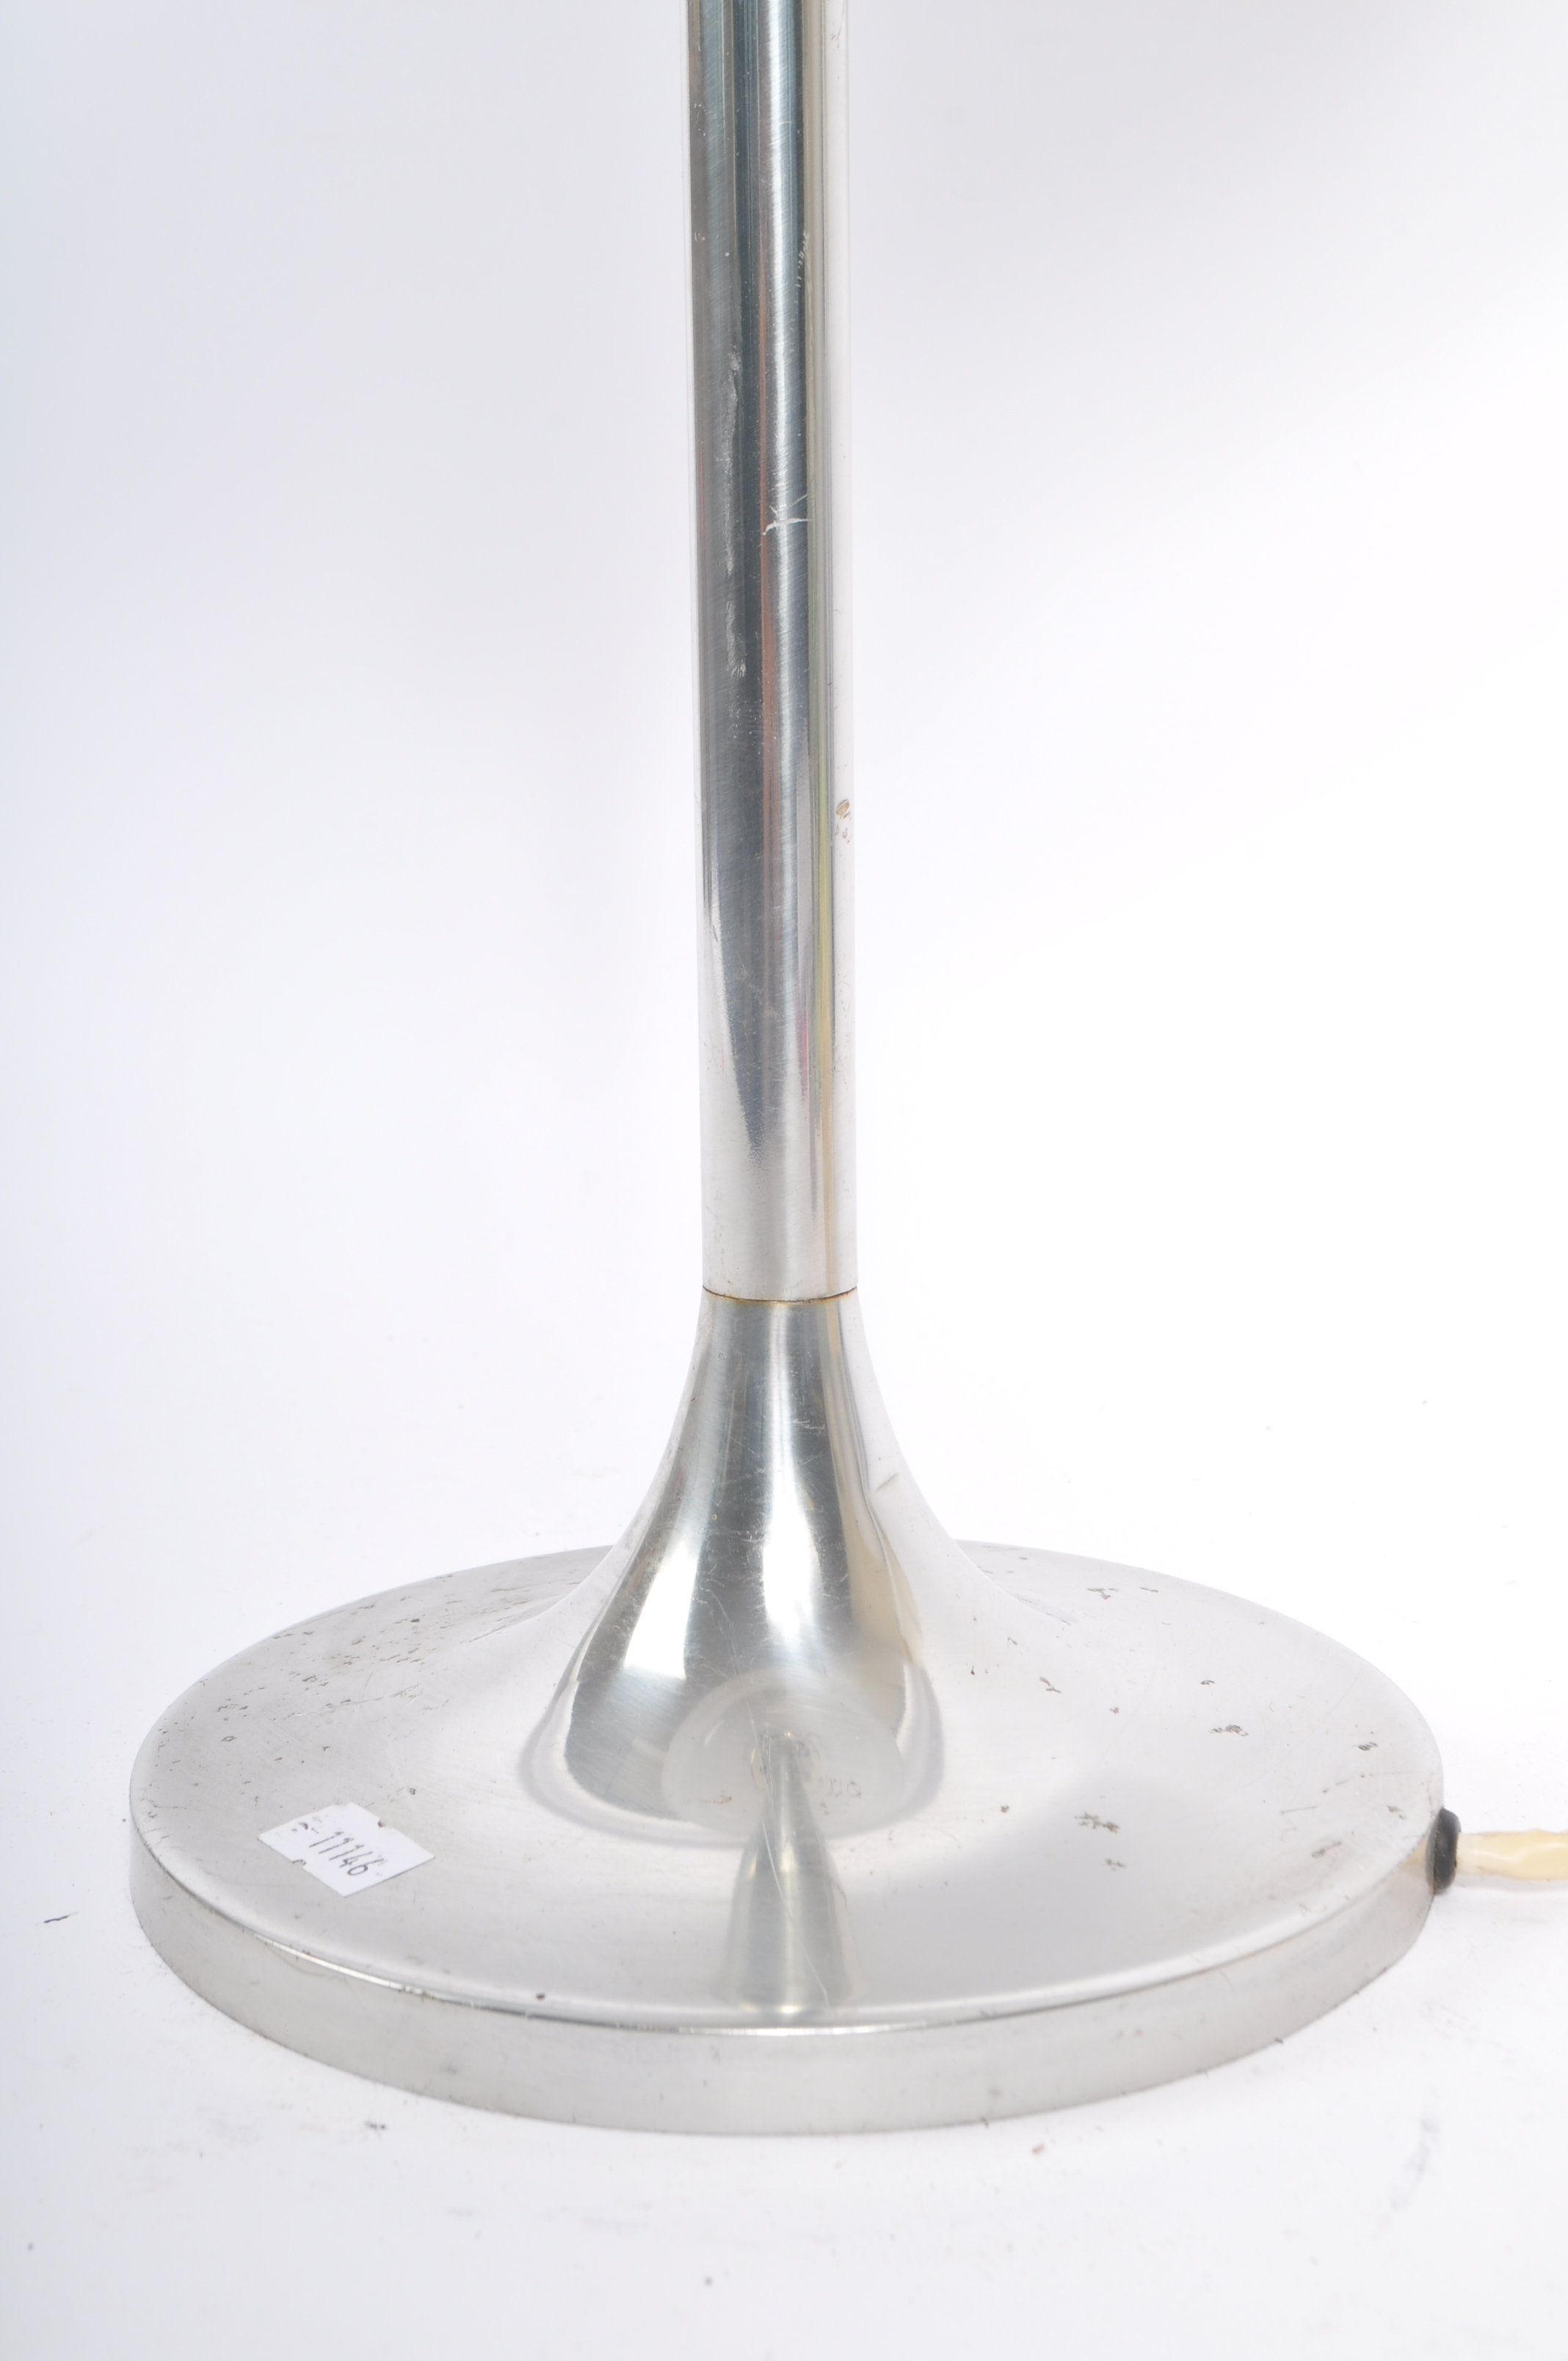 1966 LUMITRON 3000 SERIES TABLE LAMP DESIGNED BY ROBERT WELCH - Image 4 of 5